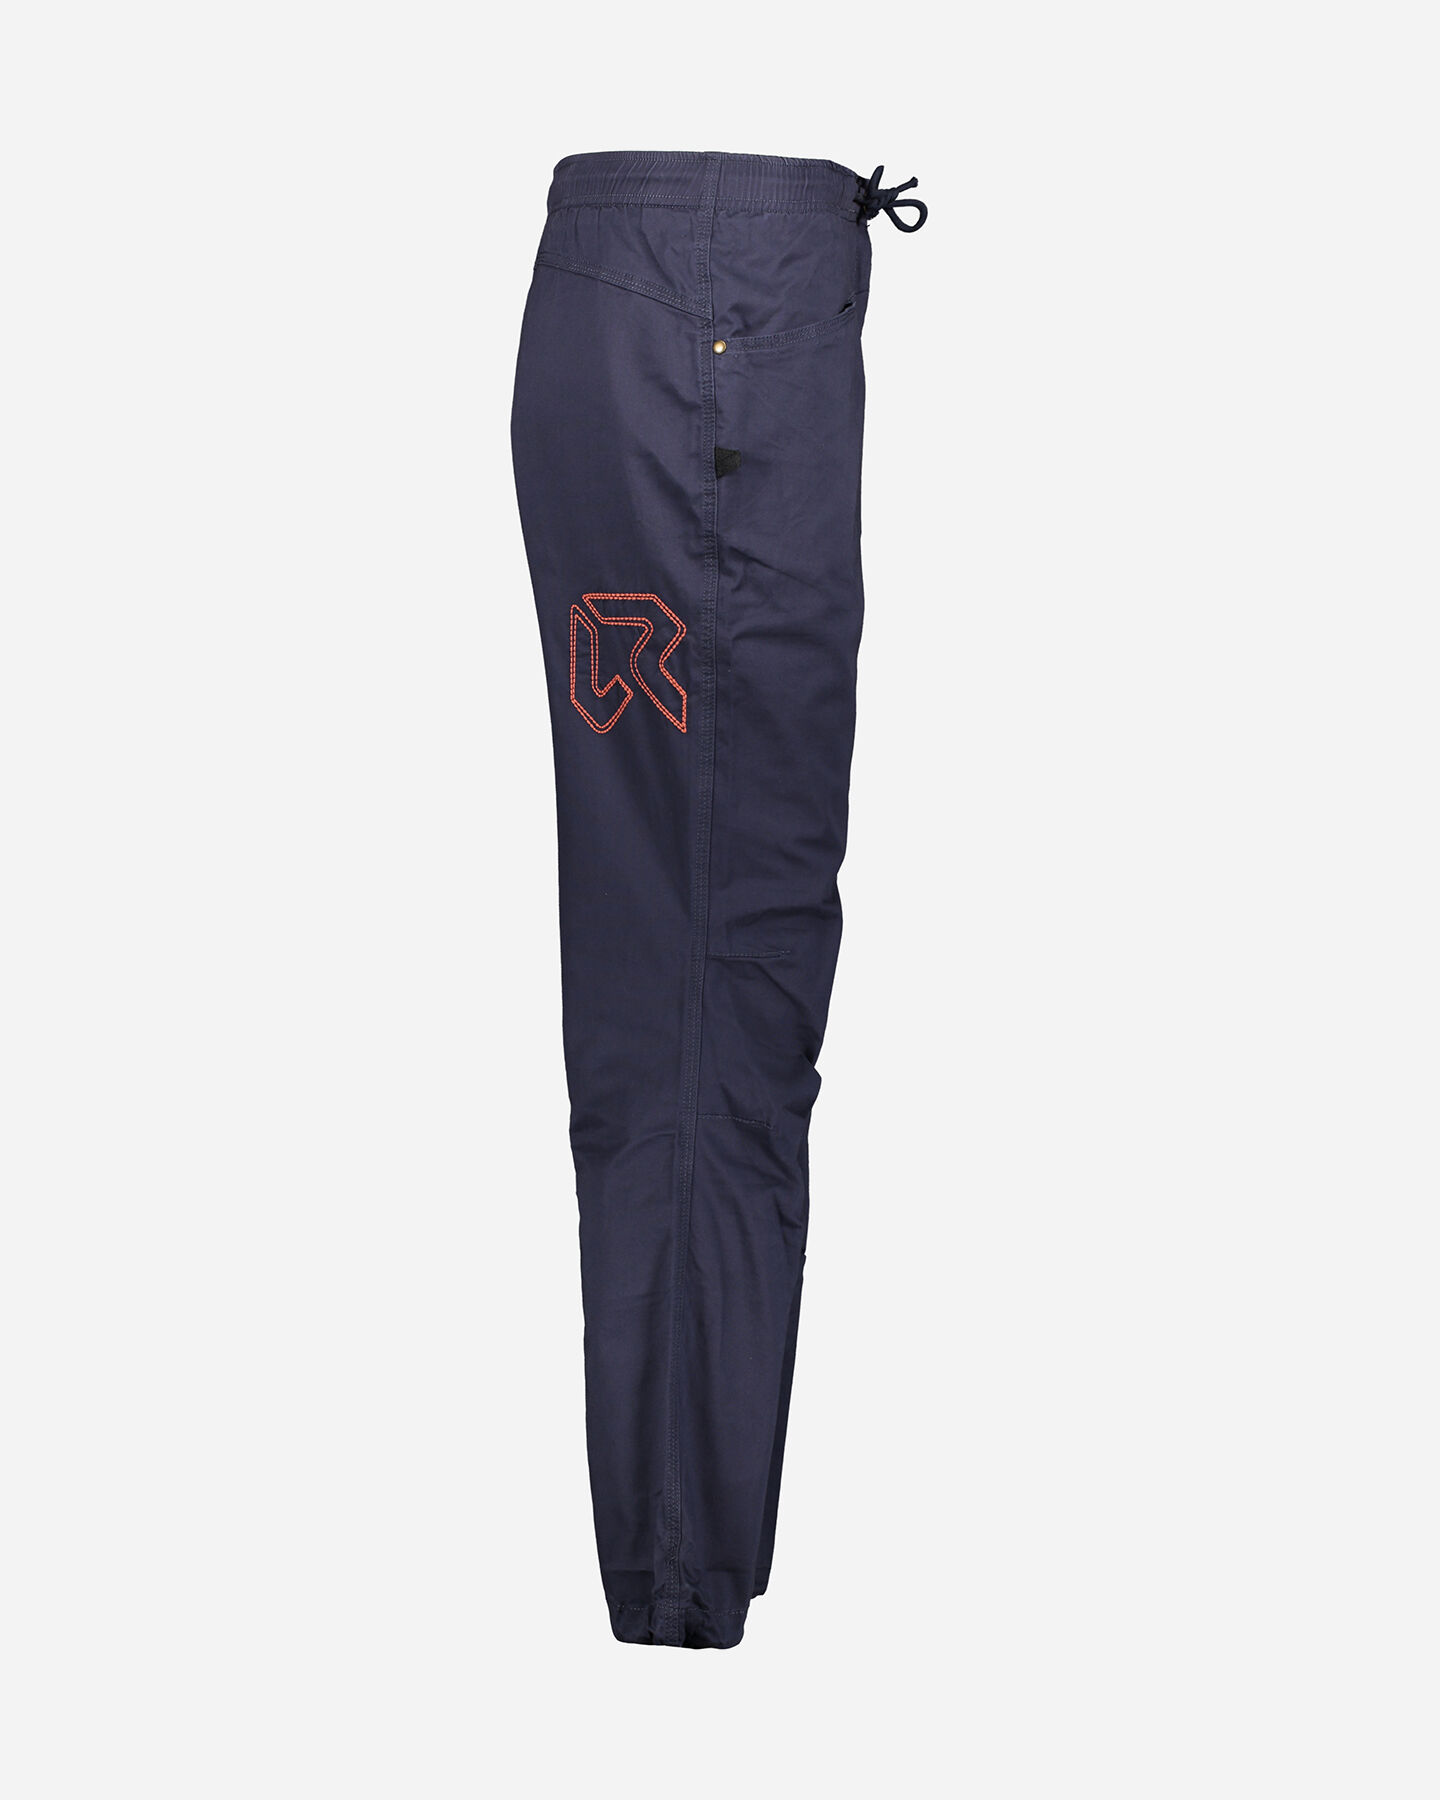  Pantalone outdoor ROCK EXPERIENCE ARKE' BOULDER W S4095884|1330|XS scatto 1